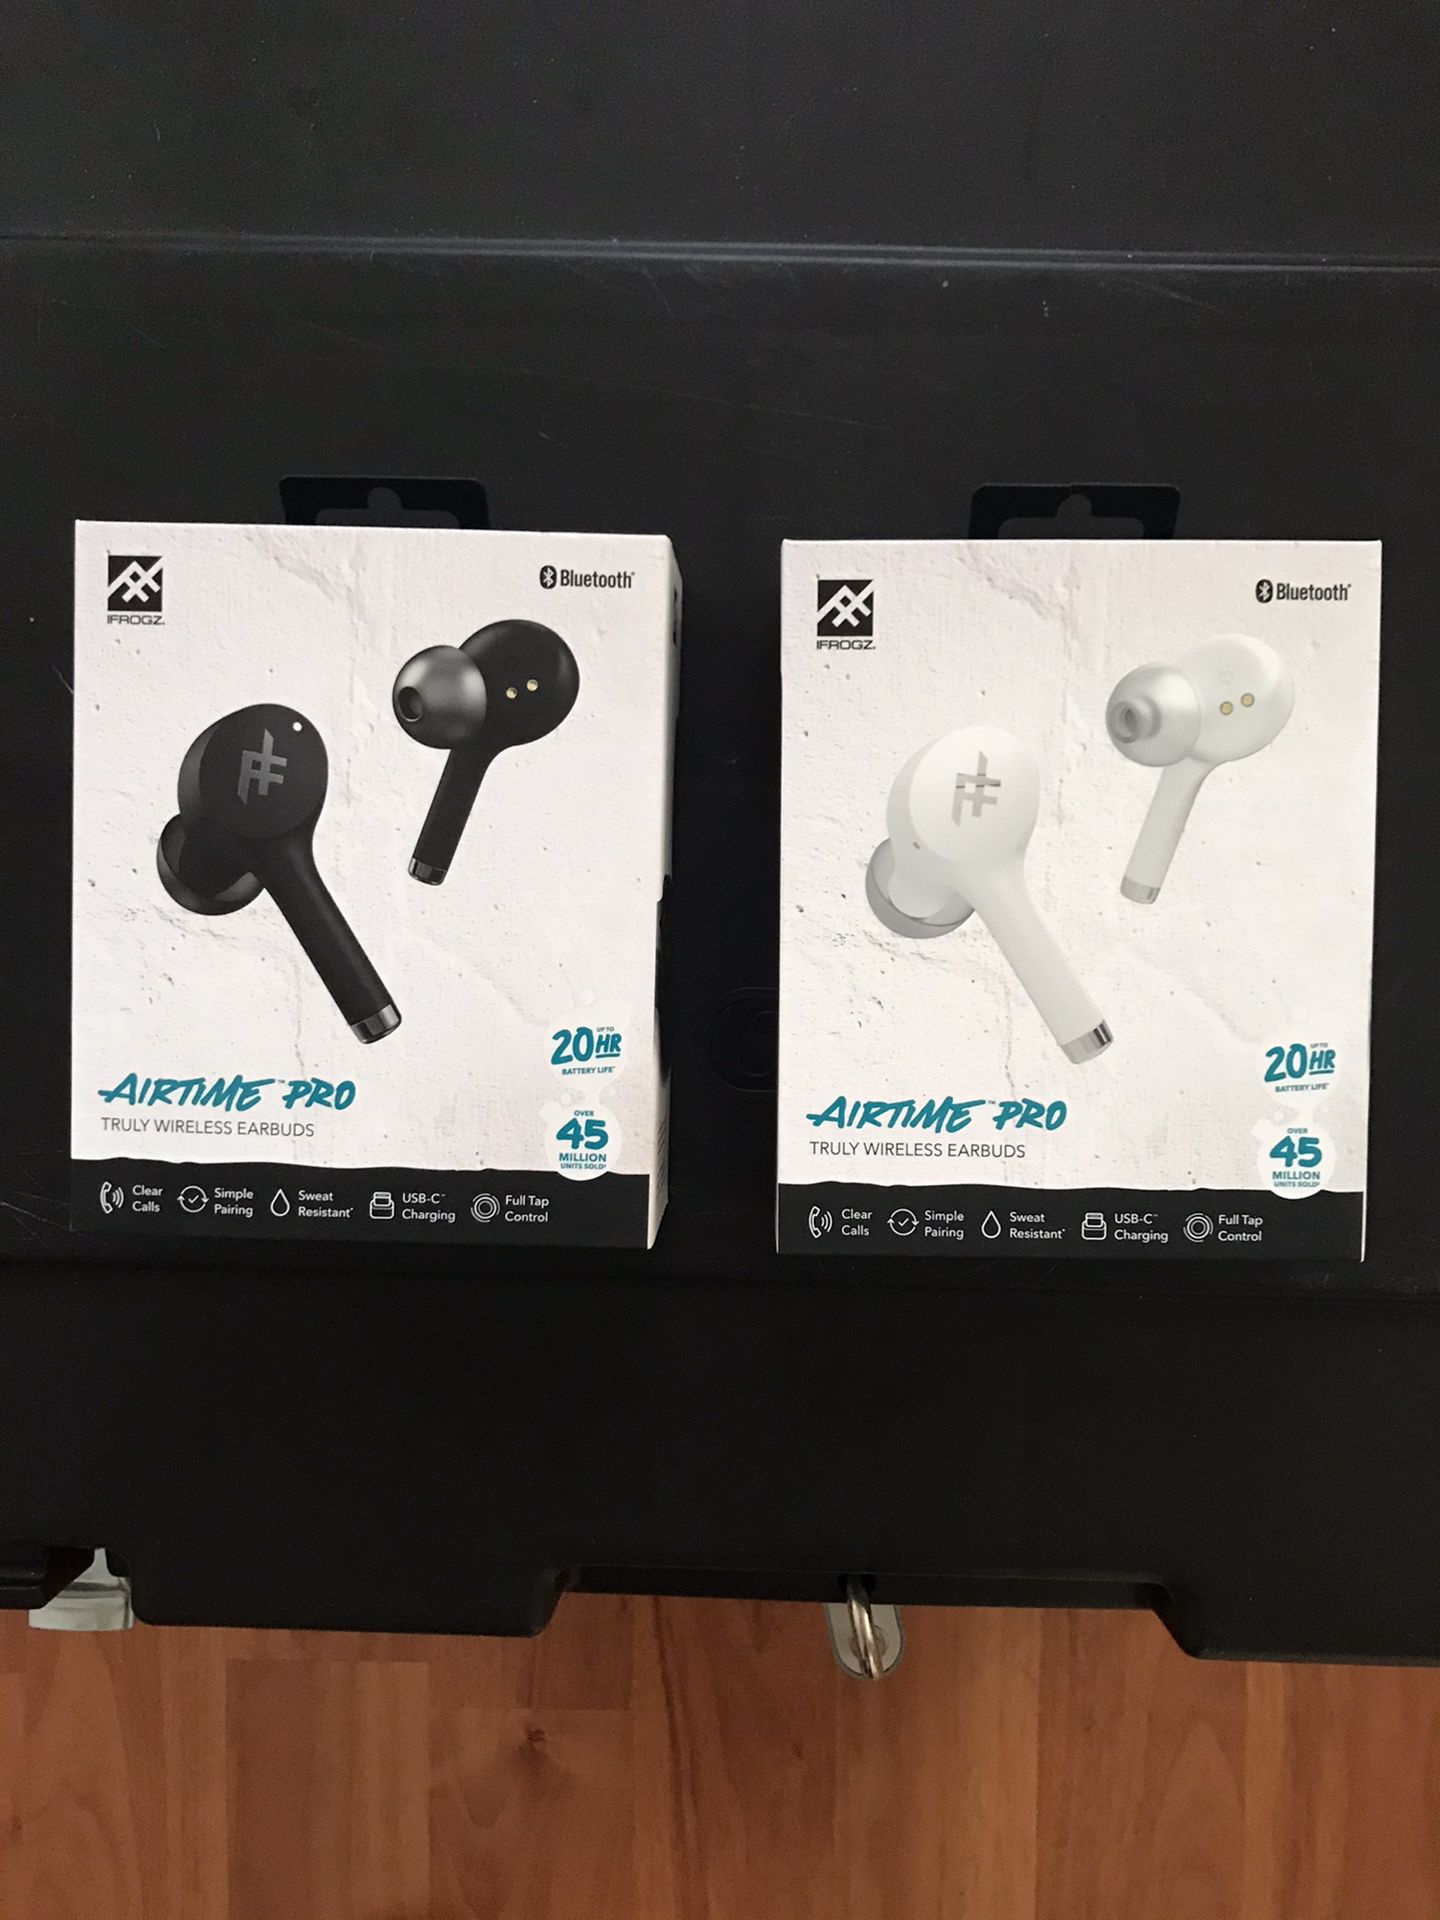 Brand New Factory Sealed IFrogz AirTime Pro Truly Wireless Earbuds!